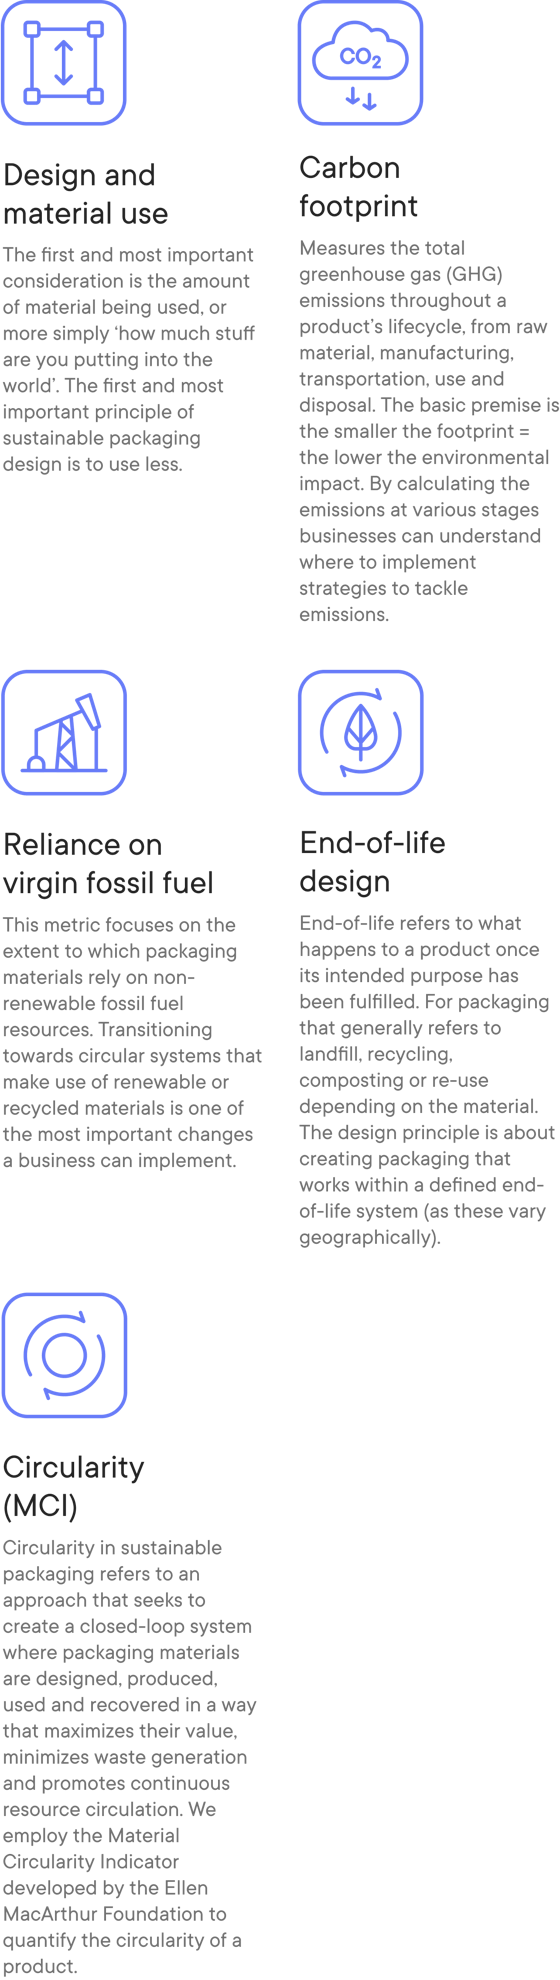 Five sustainability data points that matter most for coffee packaging: Design & material use, Carbon footprint, Reliance on virgin fossil fuel, End-of-life design, Circularity (MCI)